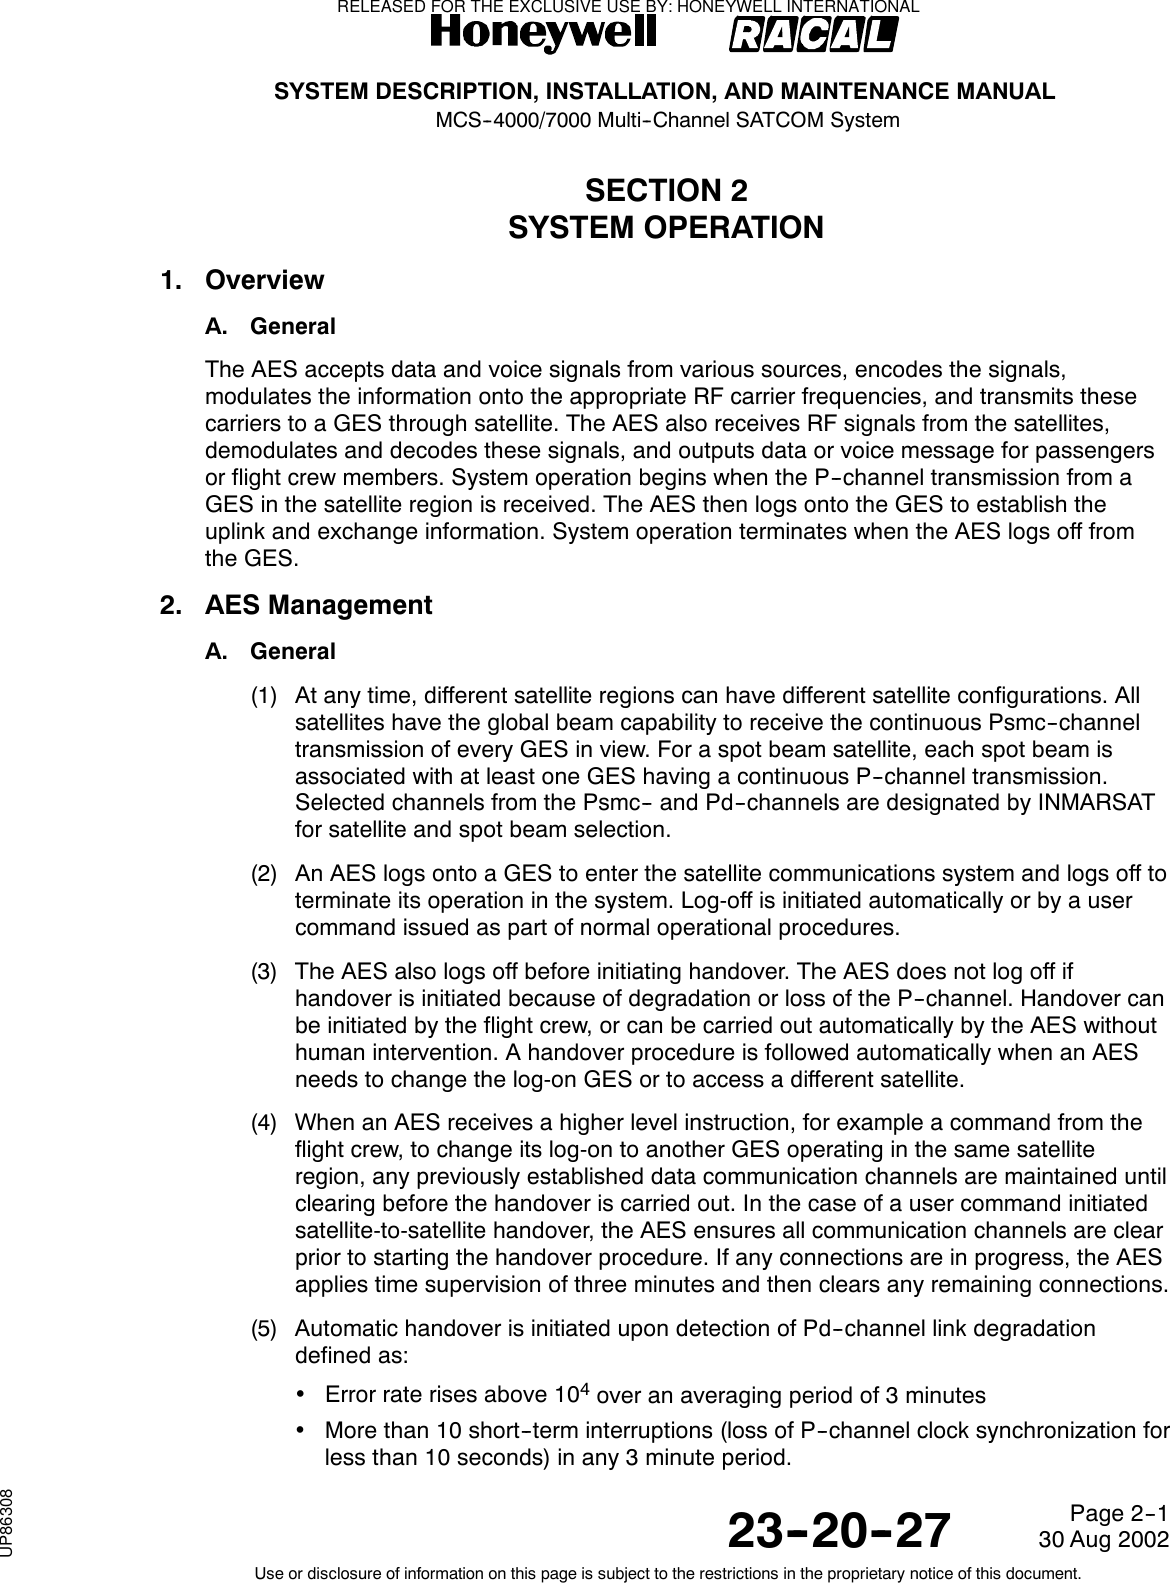 SYSTEM DESCRIPTION, INSTALLATION, AND MAINTENANCE MANUALMCS--4000/7000 Multi--Channel SATCOM System23--20--2730 Aug 2002Use or disclosure of information on this page is subject to the restrictions in the proprietary notice of this document.Page 2--1SECTION 2SYSTEM OPERATION1. OverviewA. GeneralThe AES accepts data and voice signals from various sources, encodes the signals,modulates the information onto the appropriate RF carrier frequencies, and transmits thesecarriers to a GES through satellite. The AES also receives RF signals from the satellites,demodulates and decodes these signals, and outputs data or voice message for passengersor flight crew members. System operation begins when the P--channel transmission from aGES in the satellite region is received. The AES then logs onto the GES to establish theuplink and exchange information. System operation terminates when the AES logs off fromthe GES.2. AES ManagementA. General(1) At any time, different satellite regions can have different satellite configurations. Allsatellites have the global beam capability to receive the continuous Psmc--channeltransmission of every GES in view. For a spot beam satellite, each spot beam isassociated with at least one GES having a continuous P--channel transmission.Selected channels from the Psmc-- and Pd--channels are designated by INMARSATfor satellite and spot beam selection.(2) An AES logs onto a GES to enter the satellite communications system and logs off toterminate its operation in the system. Log-off is initiated automatically or by a usercommand issued as part of normal operational procedures.(3) The AES also logs off before initiating handover. The AES does not log off ifhandover is initiated because of degradation or loss of the P--channel. Handover canbe initiated by the flight crew, or can be carried out automatically by the AES withouthuman intervention. A handover procedure is followed automatically when an AESneeds to change the log-on GES or to access a different satellite.(4) When an AES receives a higher level instruction, for example a command from theflight crew, to change its log-on to another GES operating in the same satelliteregion, any previously established data communication channels are maintained untilclearing before the handover is carried out. In the case of a user command initiatedsatellite-to-satellite handover, the AES ensures all communication channels are clearprior to starting the handover procedure. If any connections are in progress, the AESapplies time supervision of three minutes and then clears any remaining connections.(5) Automatic handover is initiated upon detection of Pd--channel link degradationdefined as:•Error rate rises above 104over an averaging period of 3 minutes•More than 10 short--term interruptions (loss of P--channel clock synchronization forless than 10 seconds) in any 3 minute period.RELEASED FOR THE EXCLUSIVE USE BY: HONEYWELL INTERNATIONALUP86308